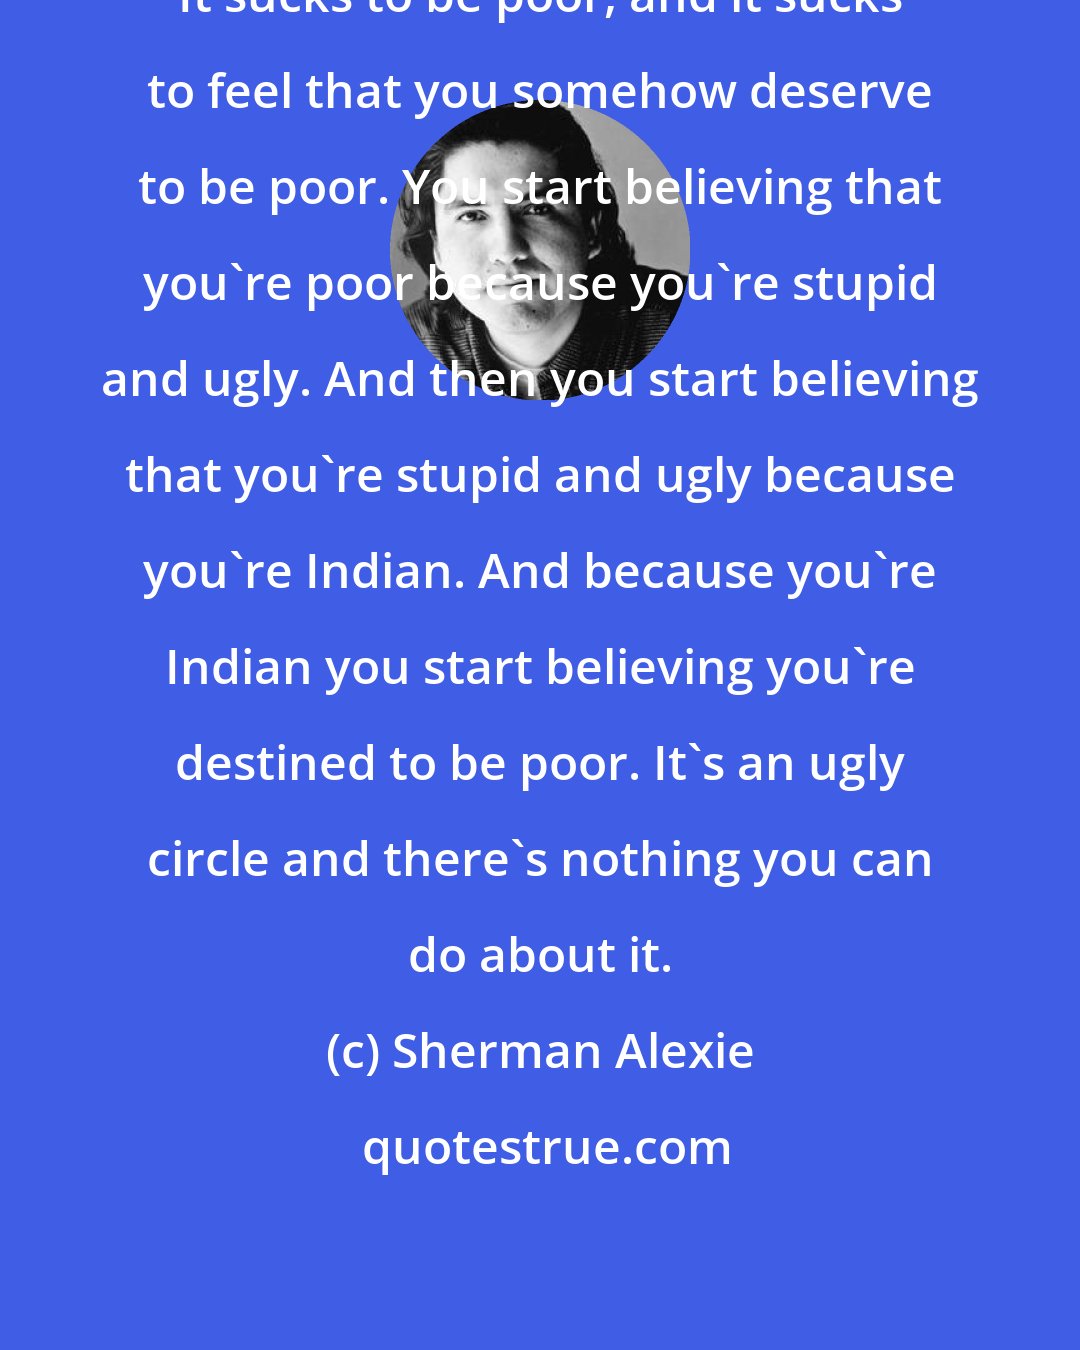 Sherman Alexie: It sucks to be poor, and it sucks to feel that you somehow deserve to be poor. You start believing that you're poor because you're stupid and ugly. And then you start believing that you're stupid and ugly because you're Indian. And because you're Indian you start believing you're destined to be poor. It's an ugly circle and there's nothing you can do about it.